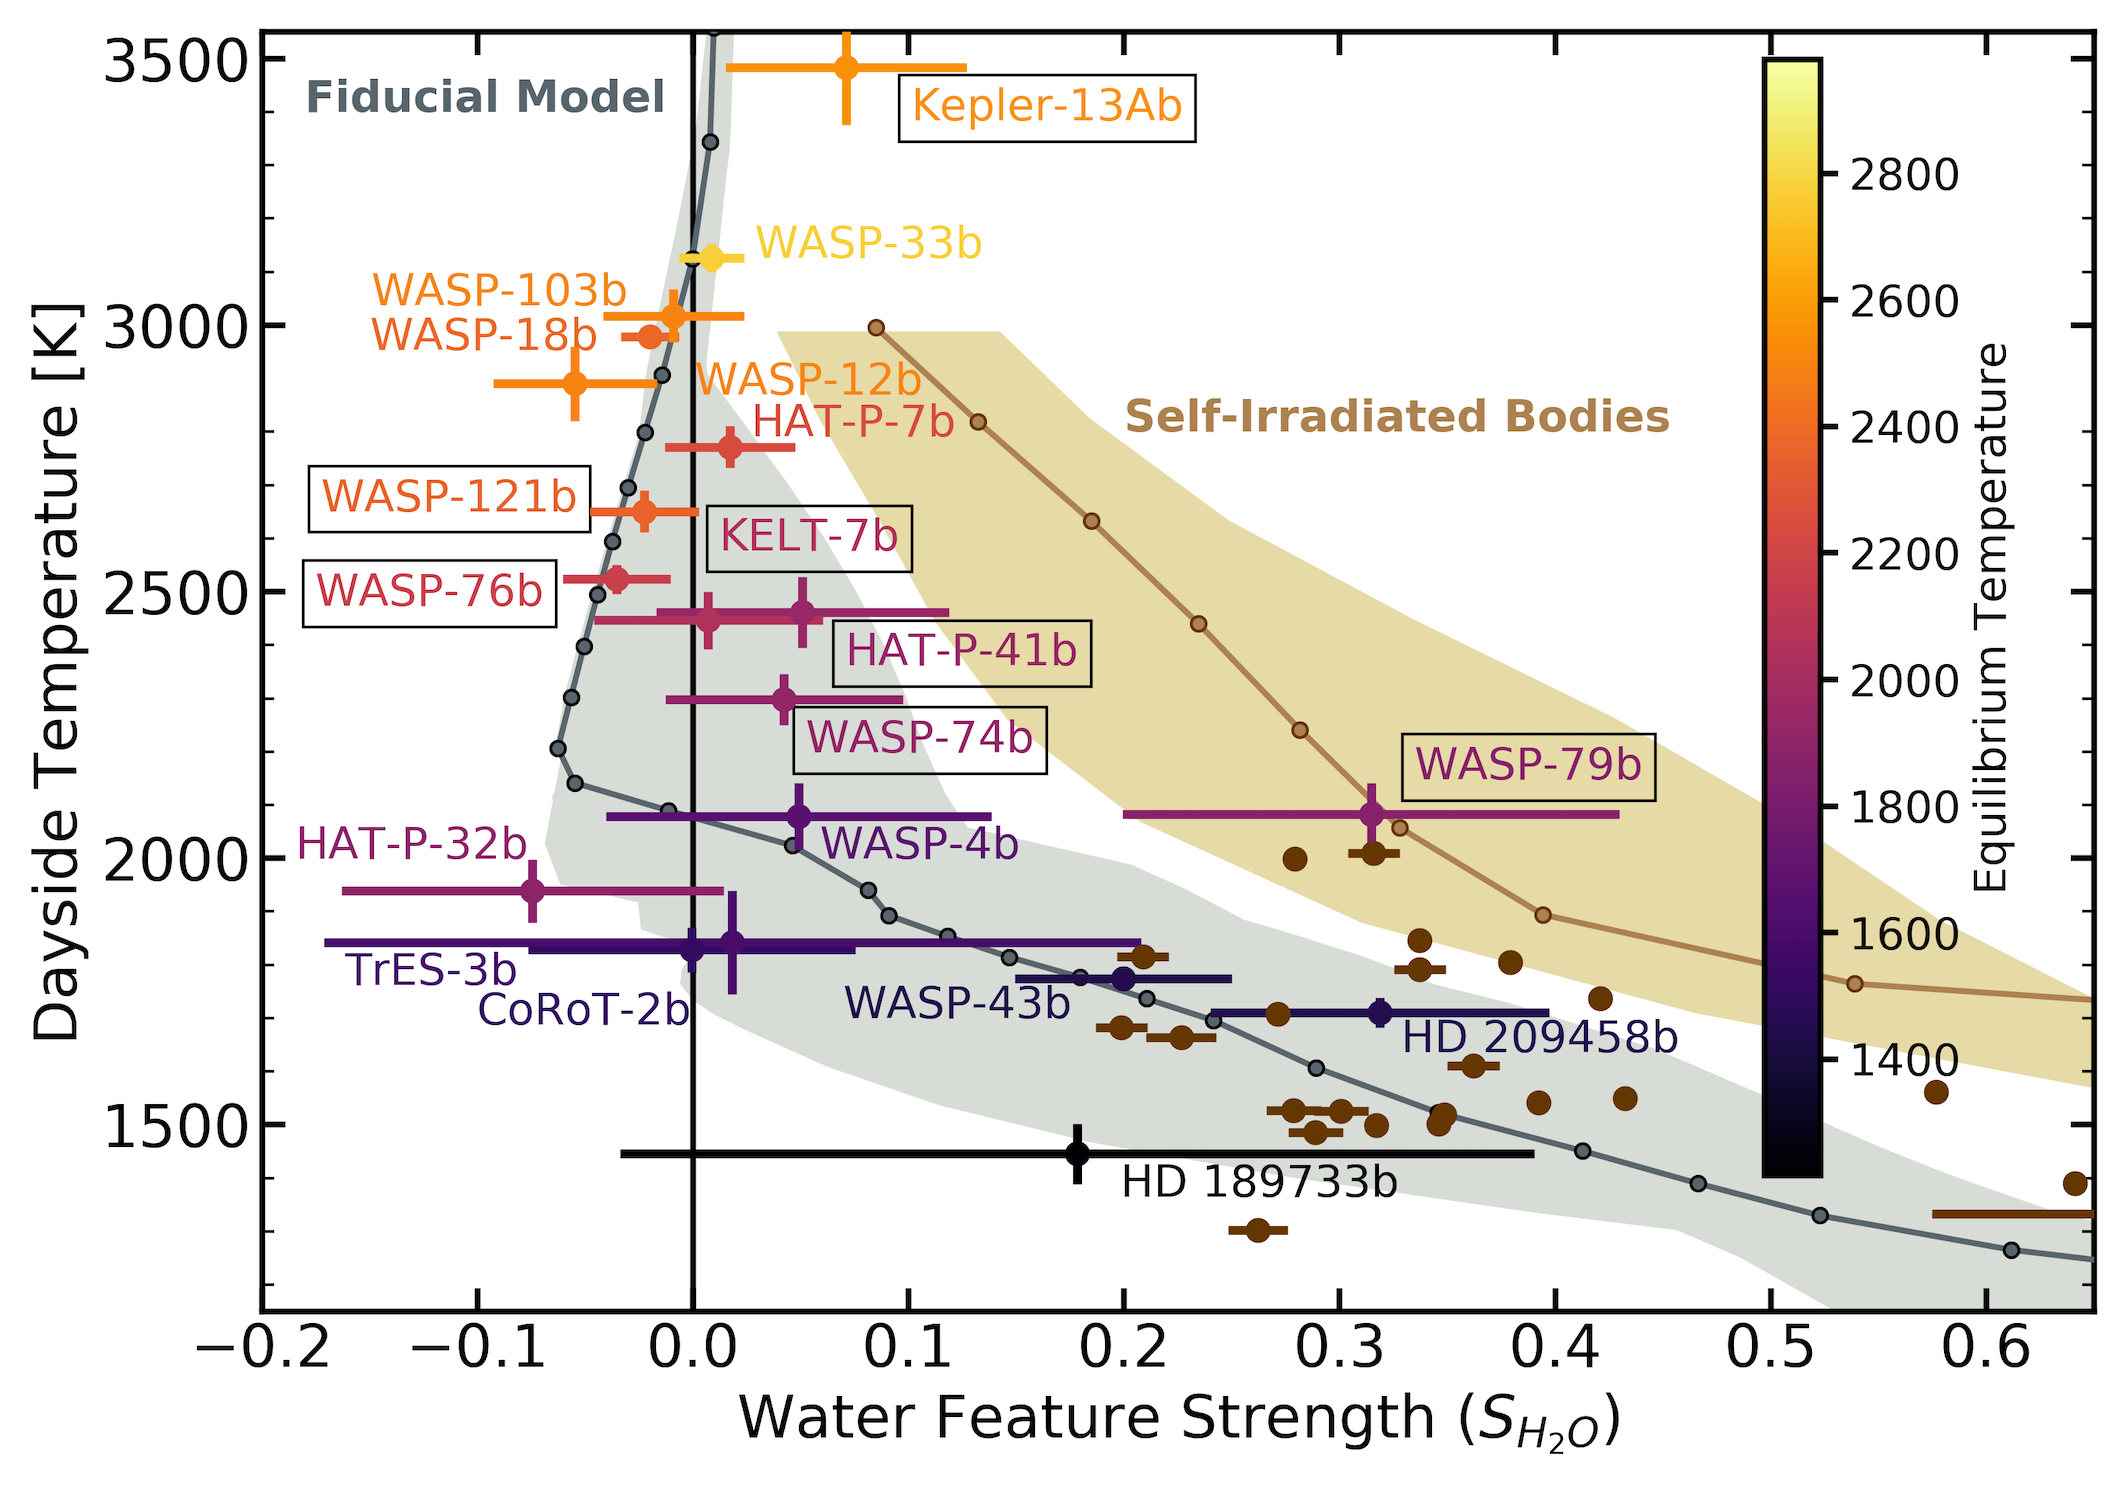 Figure comparing water feature strengths of observed hot Jupiters to those of self-consistent 1D models